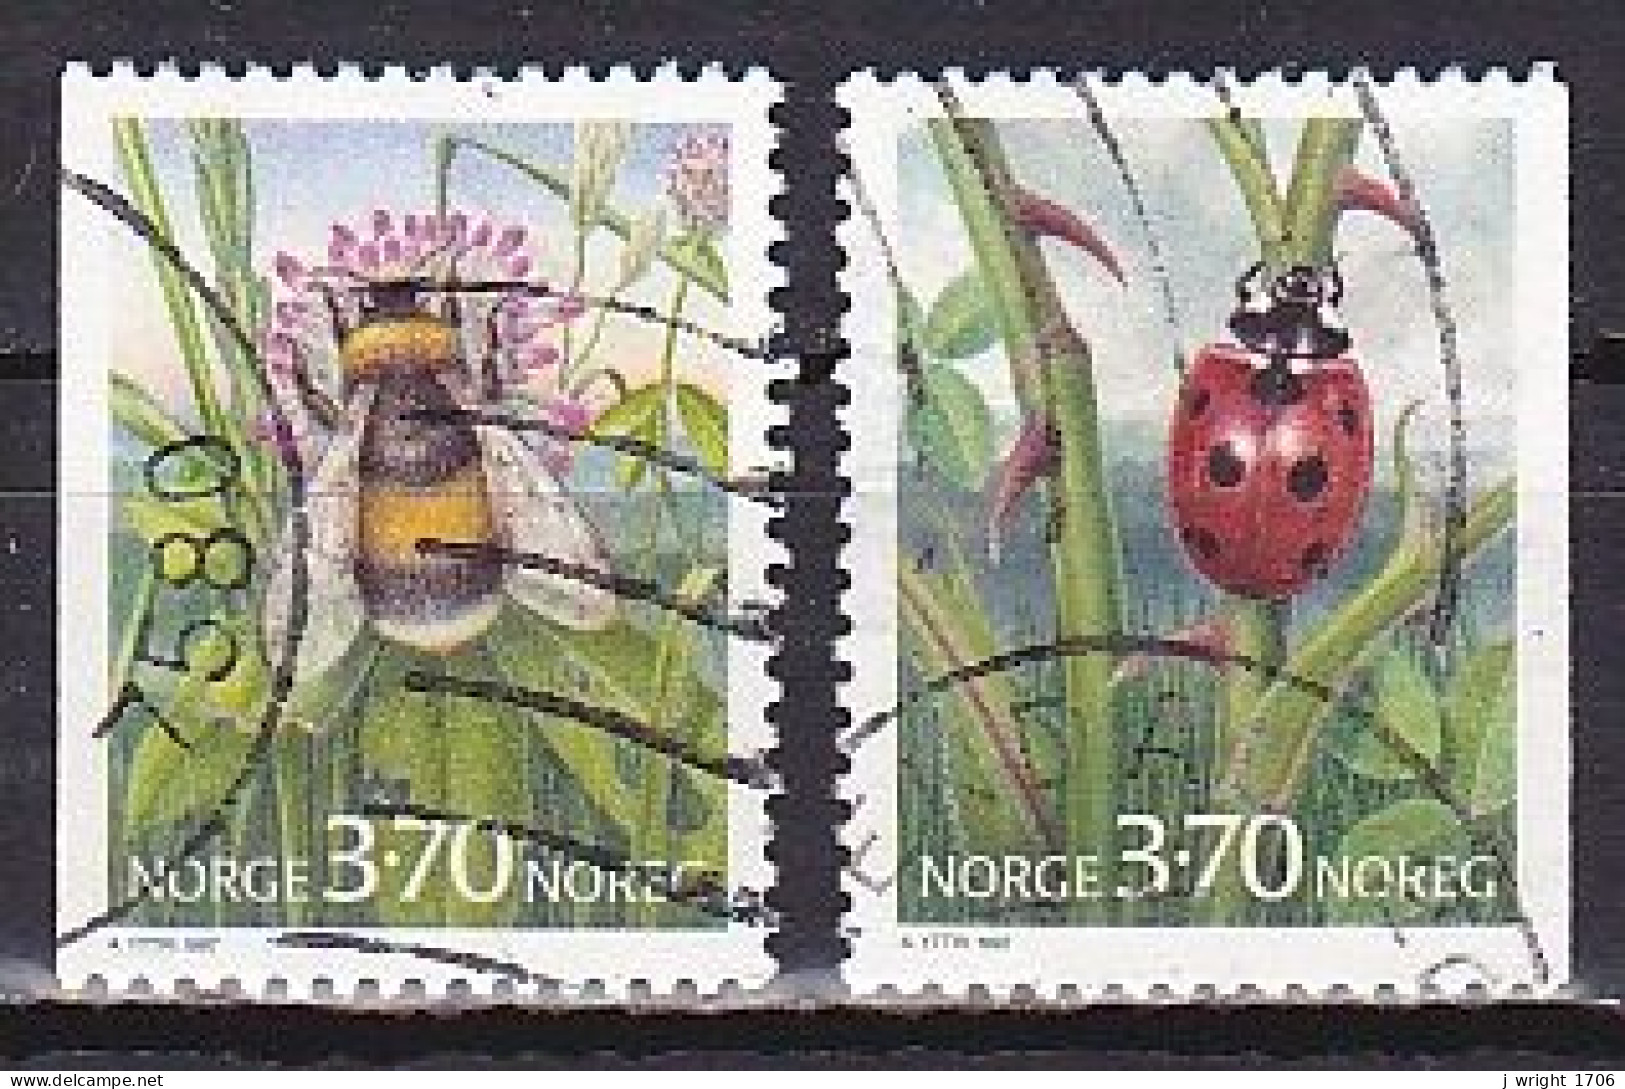 Norway, 1997, Insects, Set, USED - Gebruikt